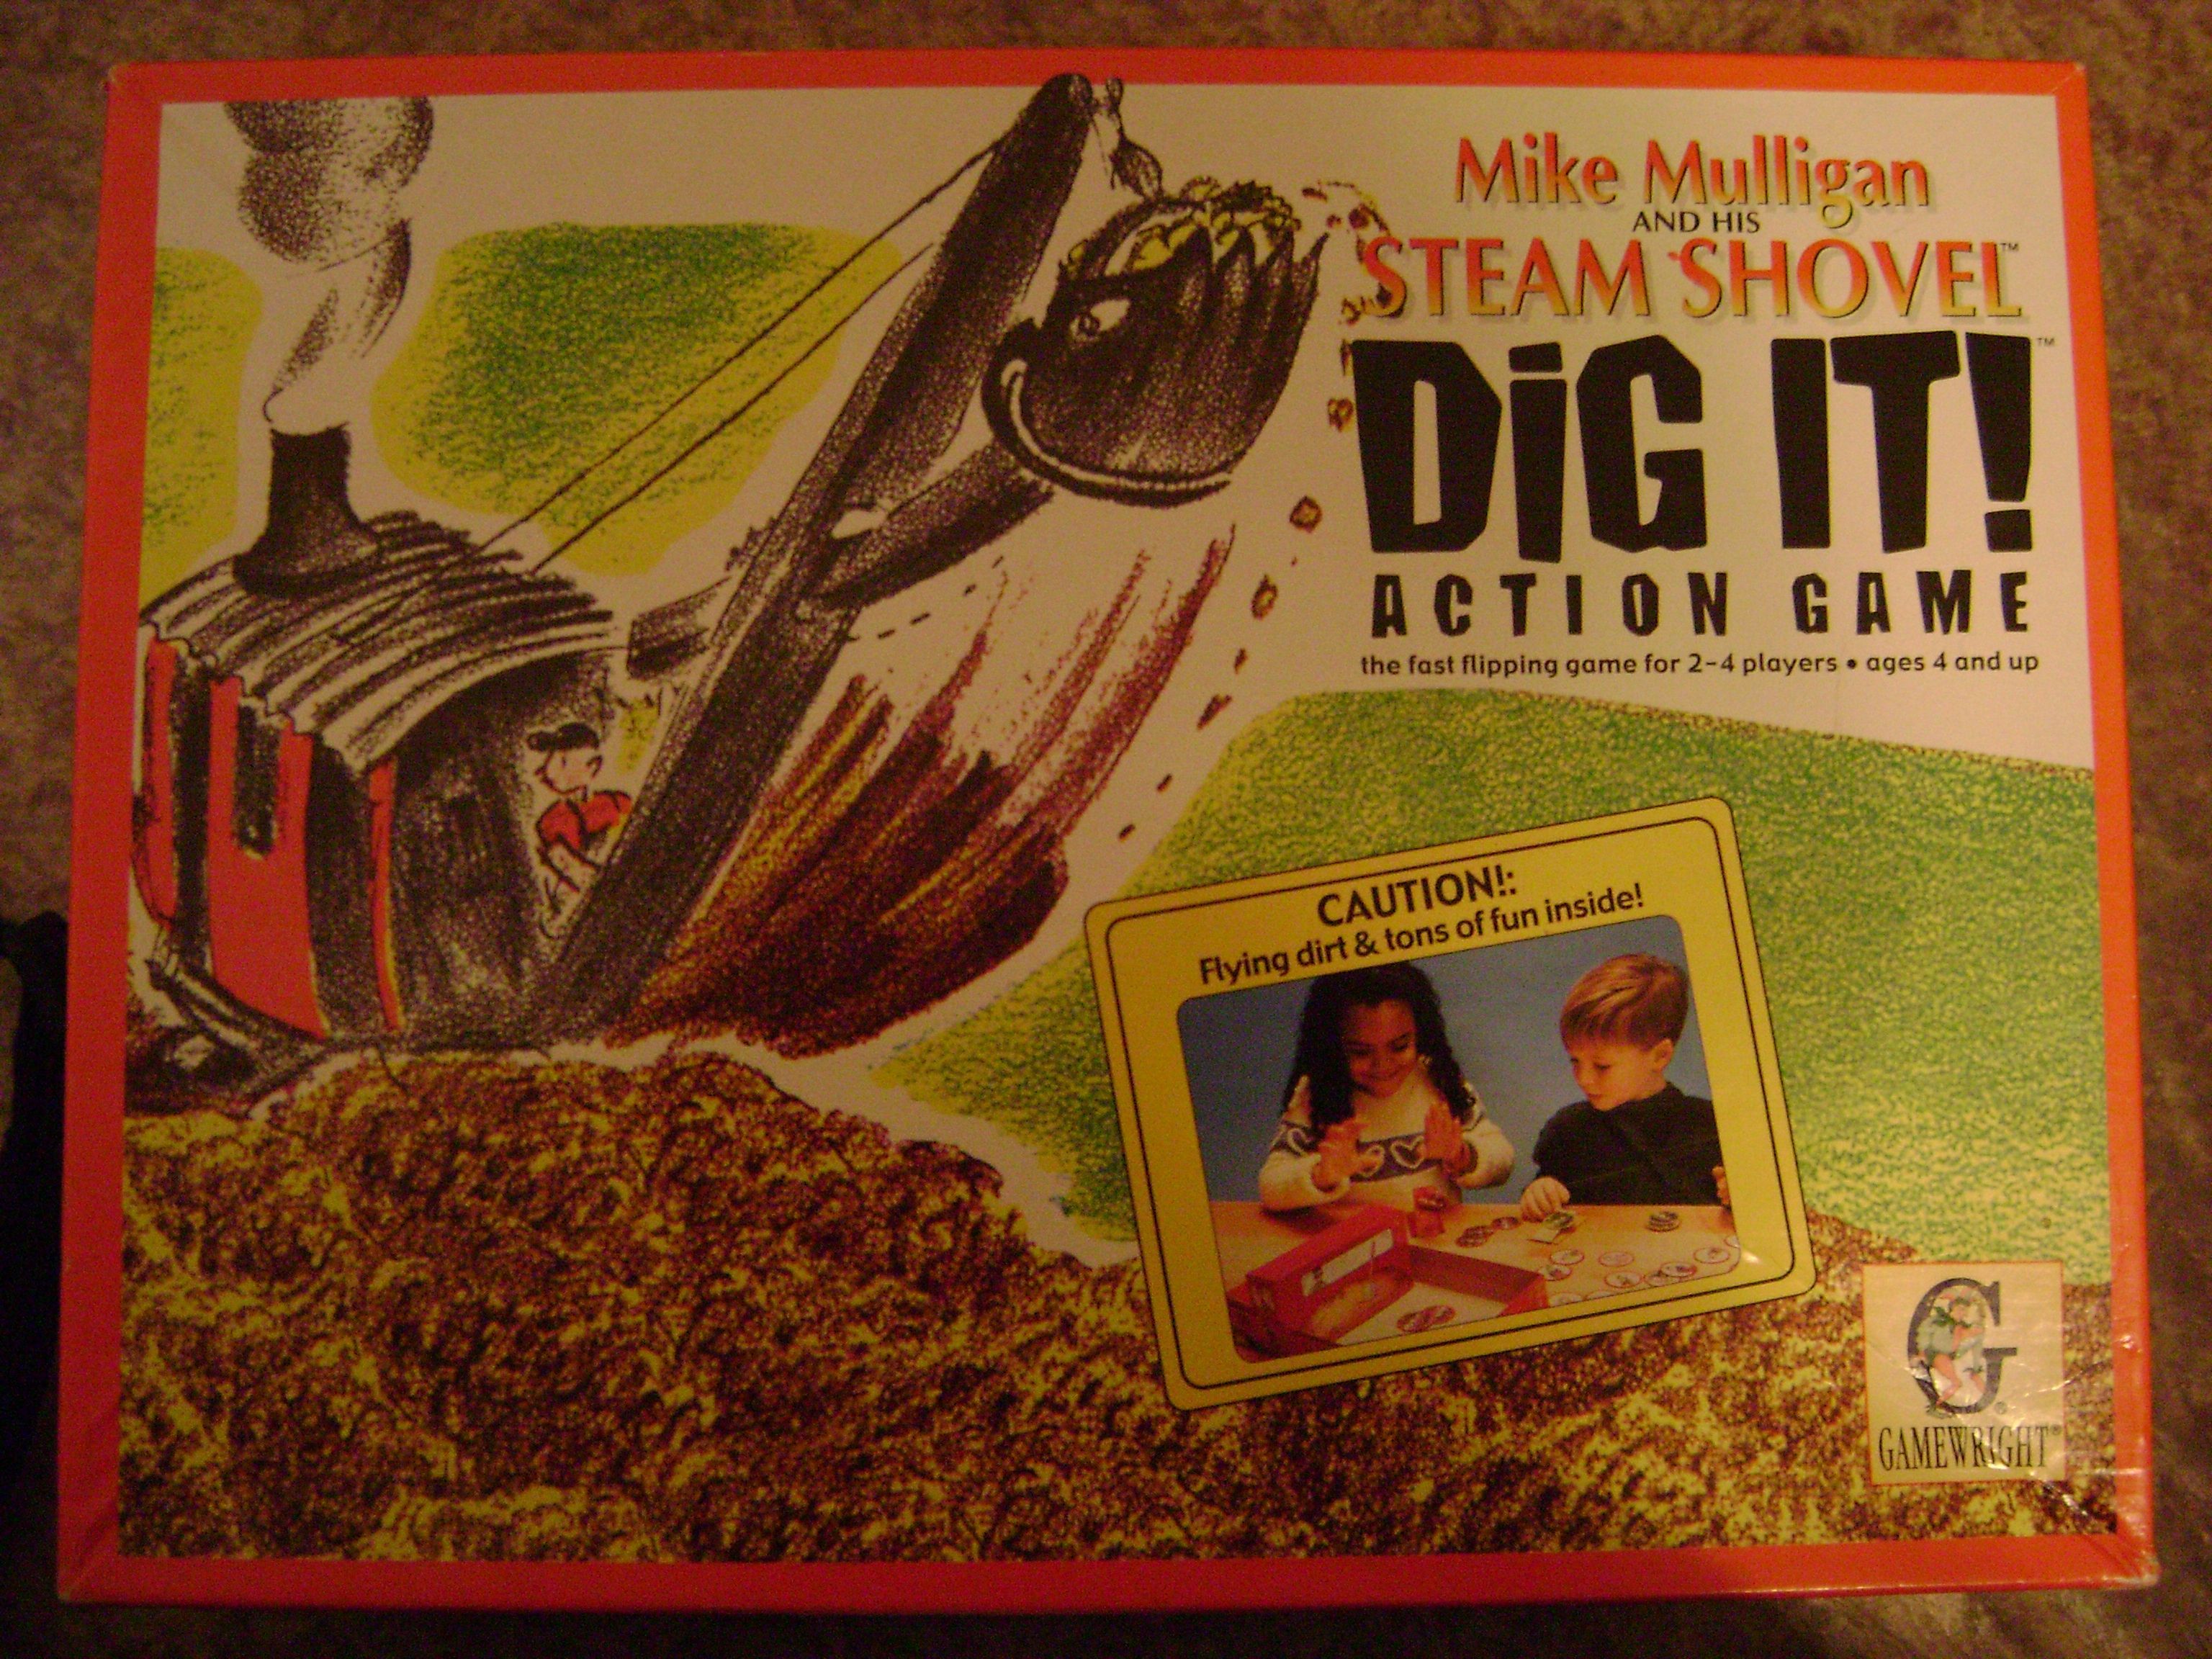 Mike Mulligan and His Steam Shovel Dig It! Action Game